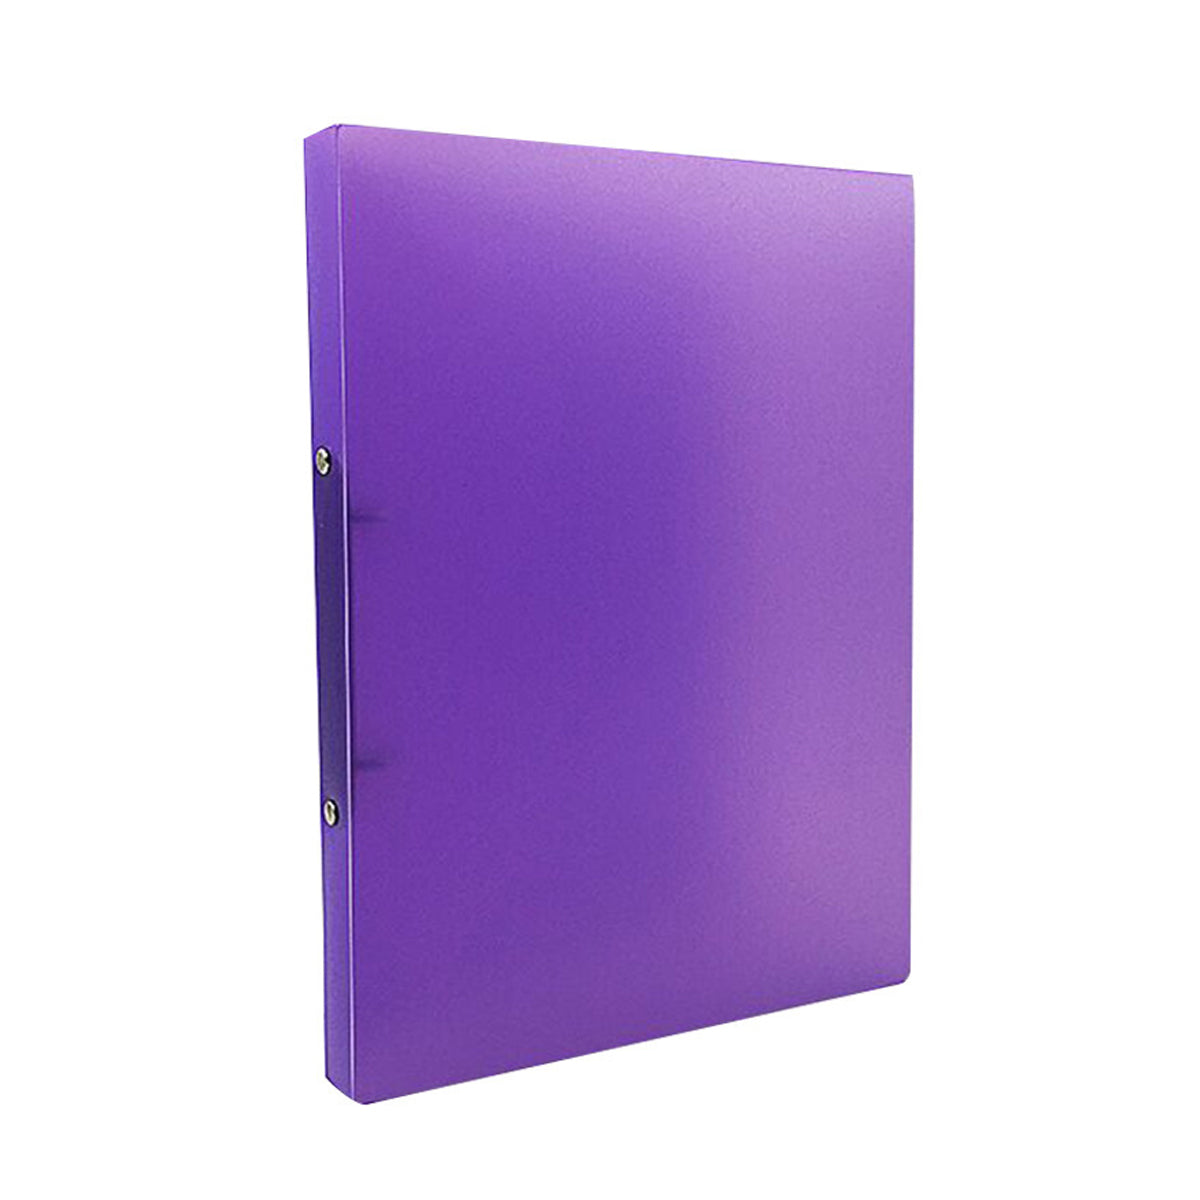 2 Ring Binder,Binder Organizer Holds 8.5’’ x 11’’ Paper with Tag